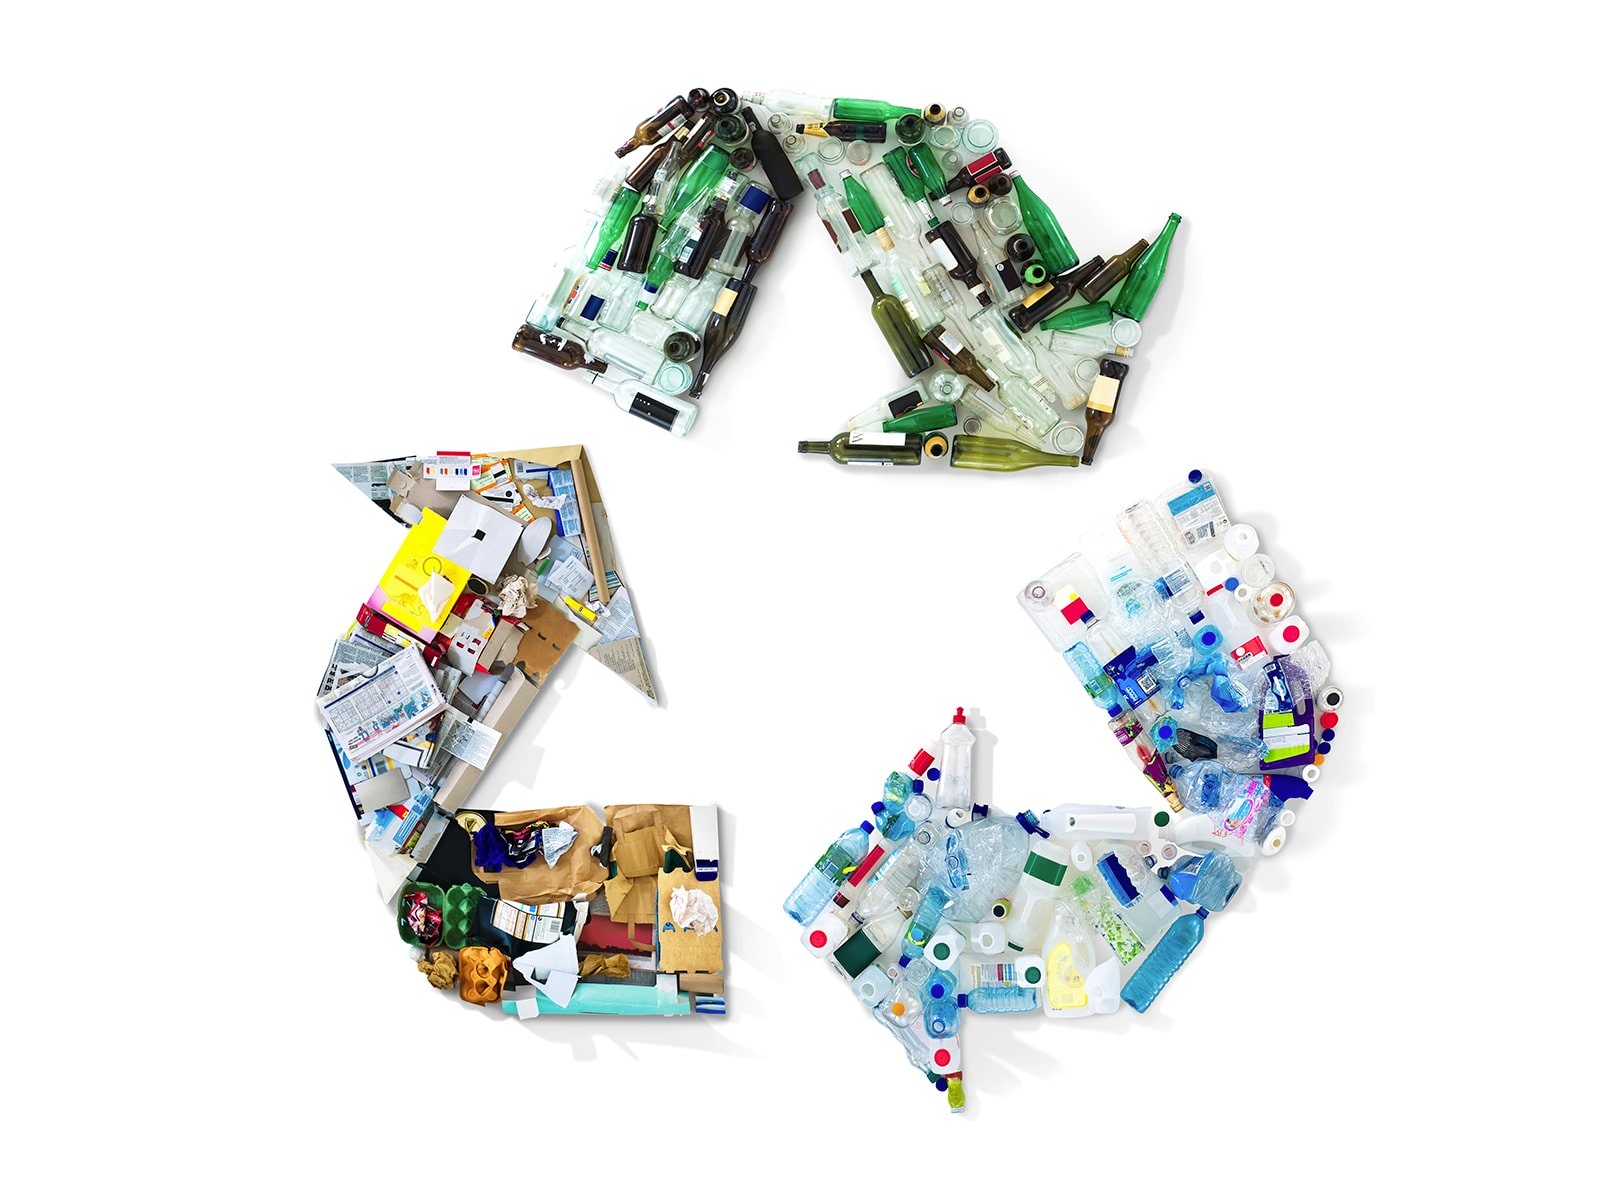 Recycling items arranged in a shape of a recycling symbol